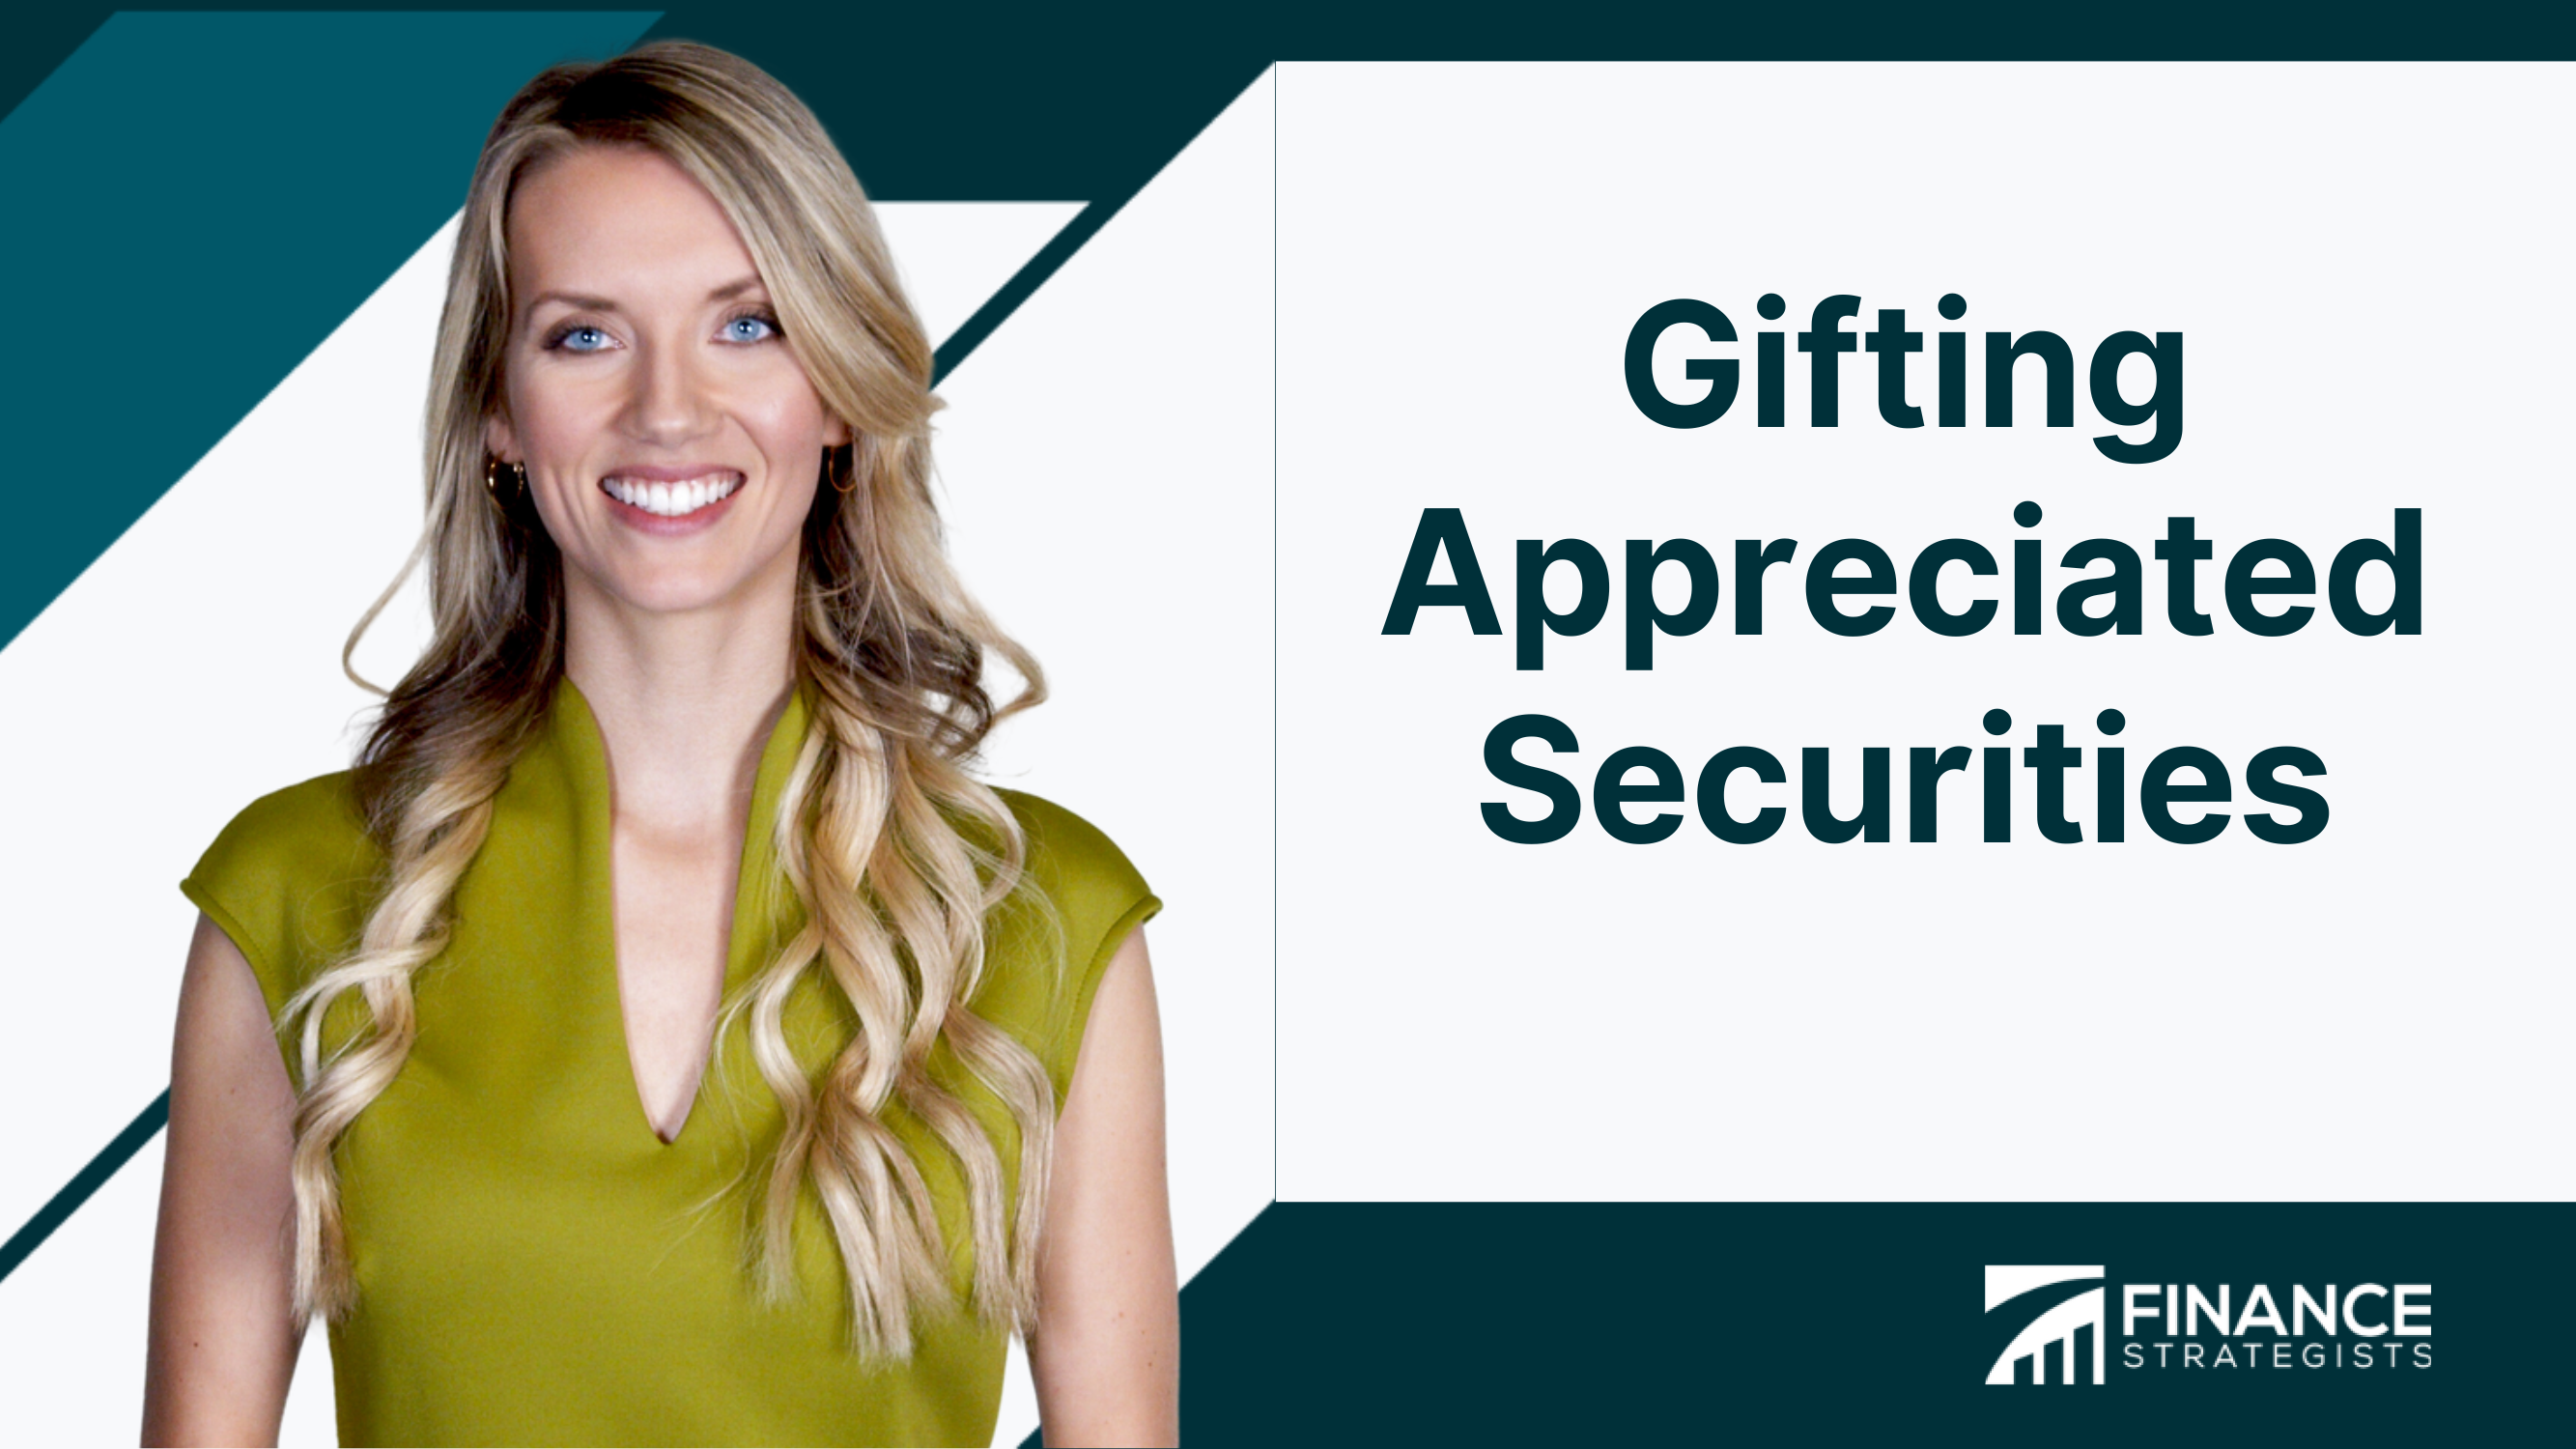 Details more than 140 gifting appreciated securities super hot